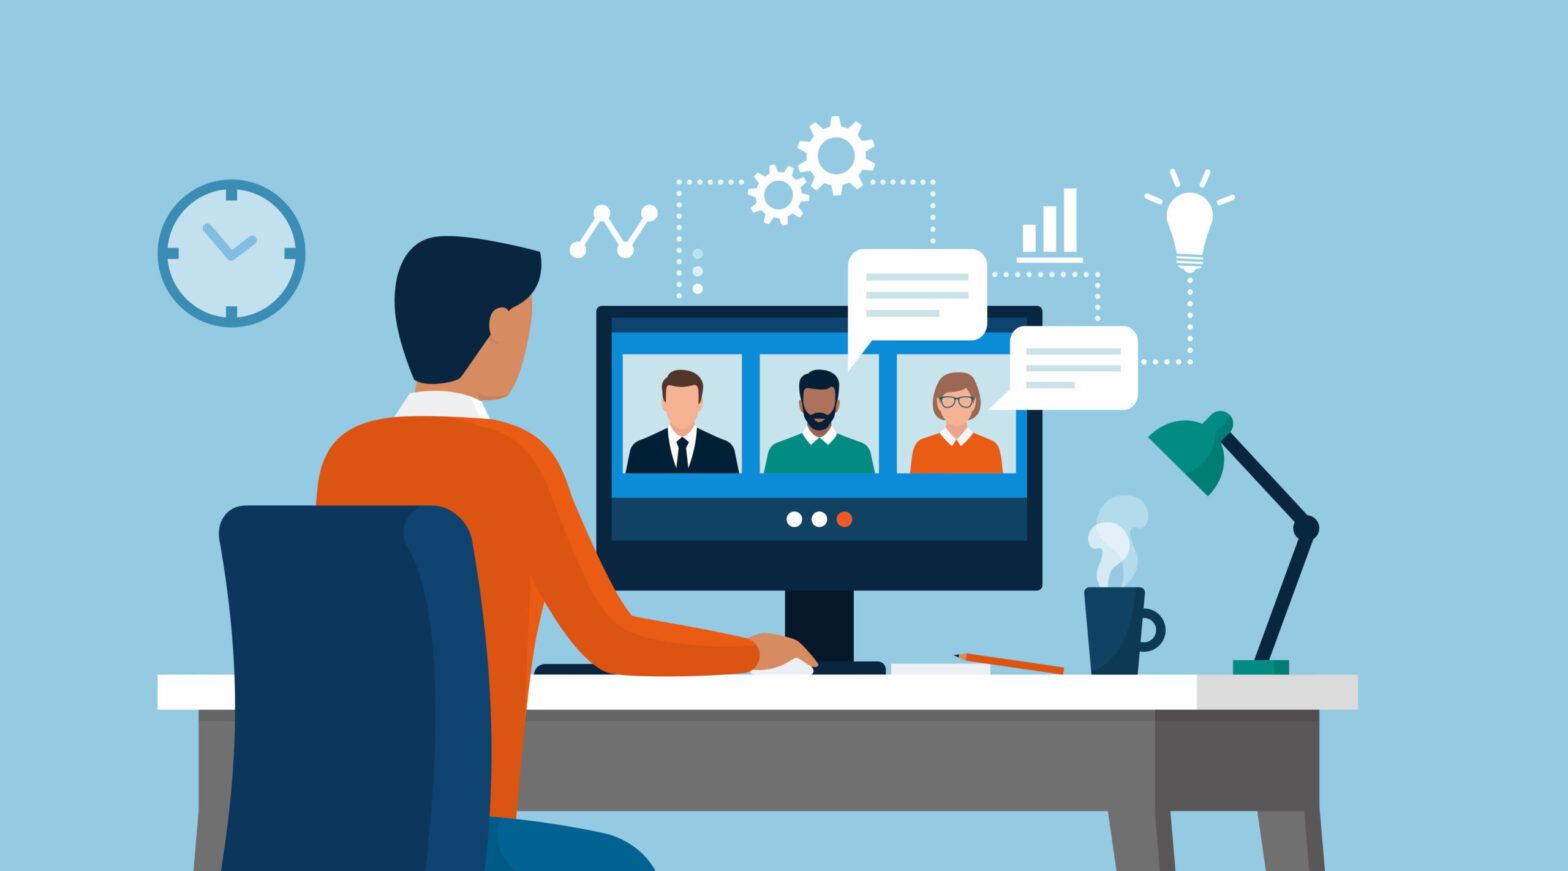 Asset managers: Virtual AGMs are no replacement for in-person meetings